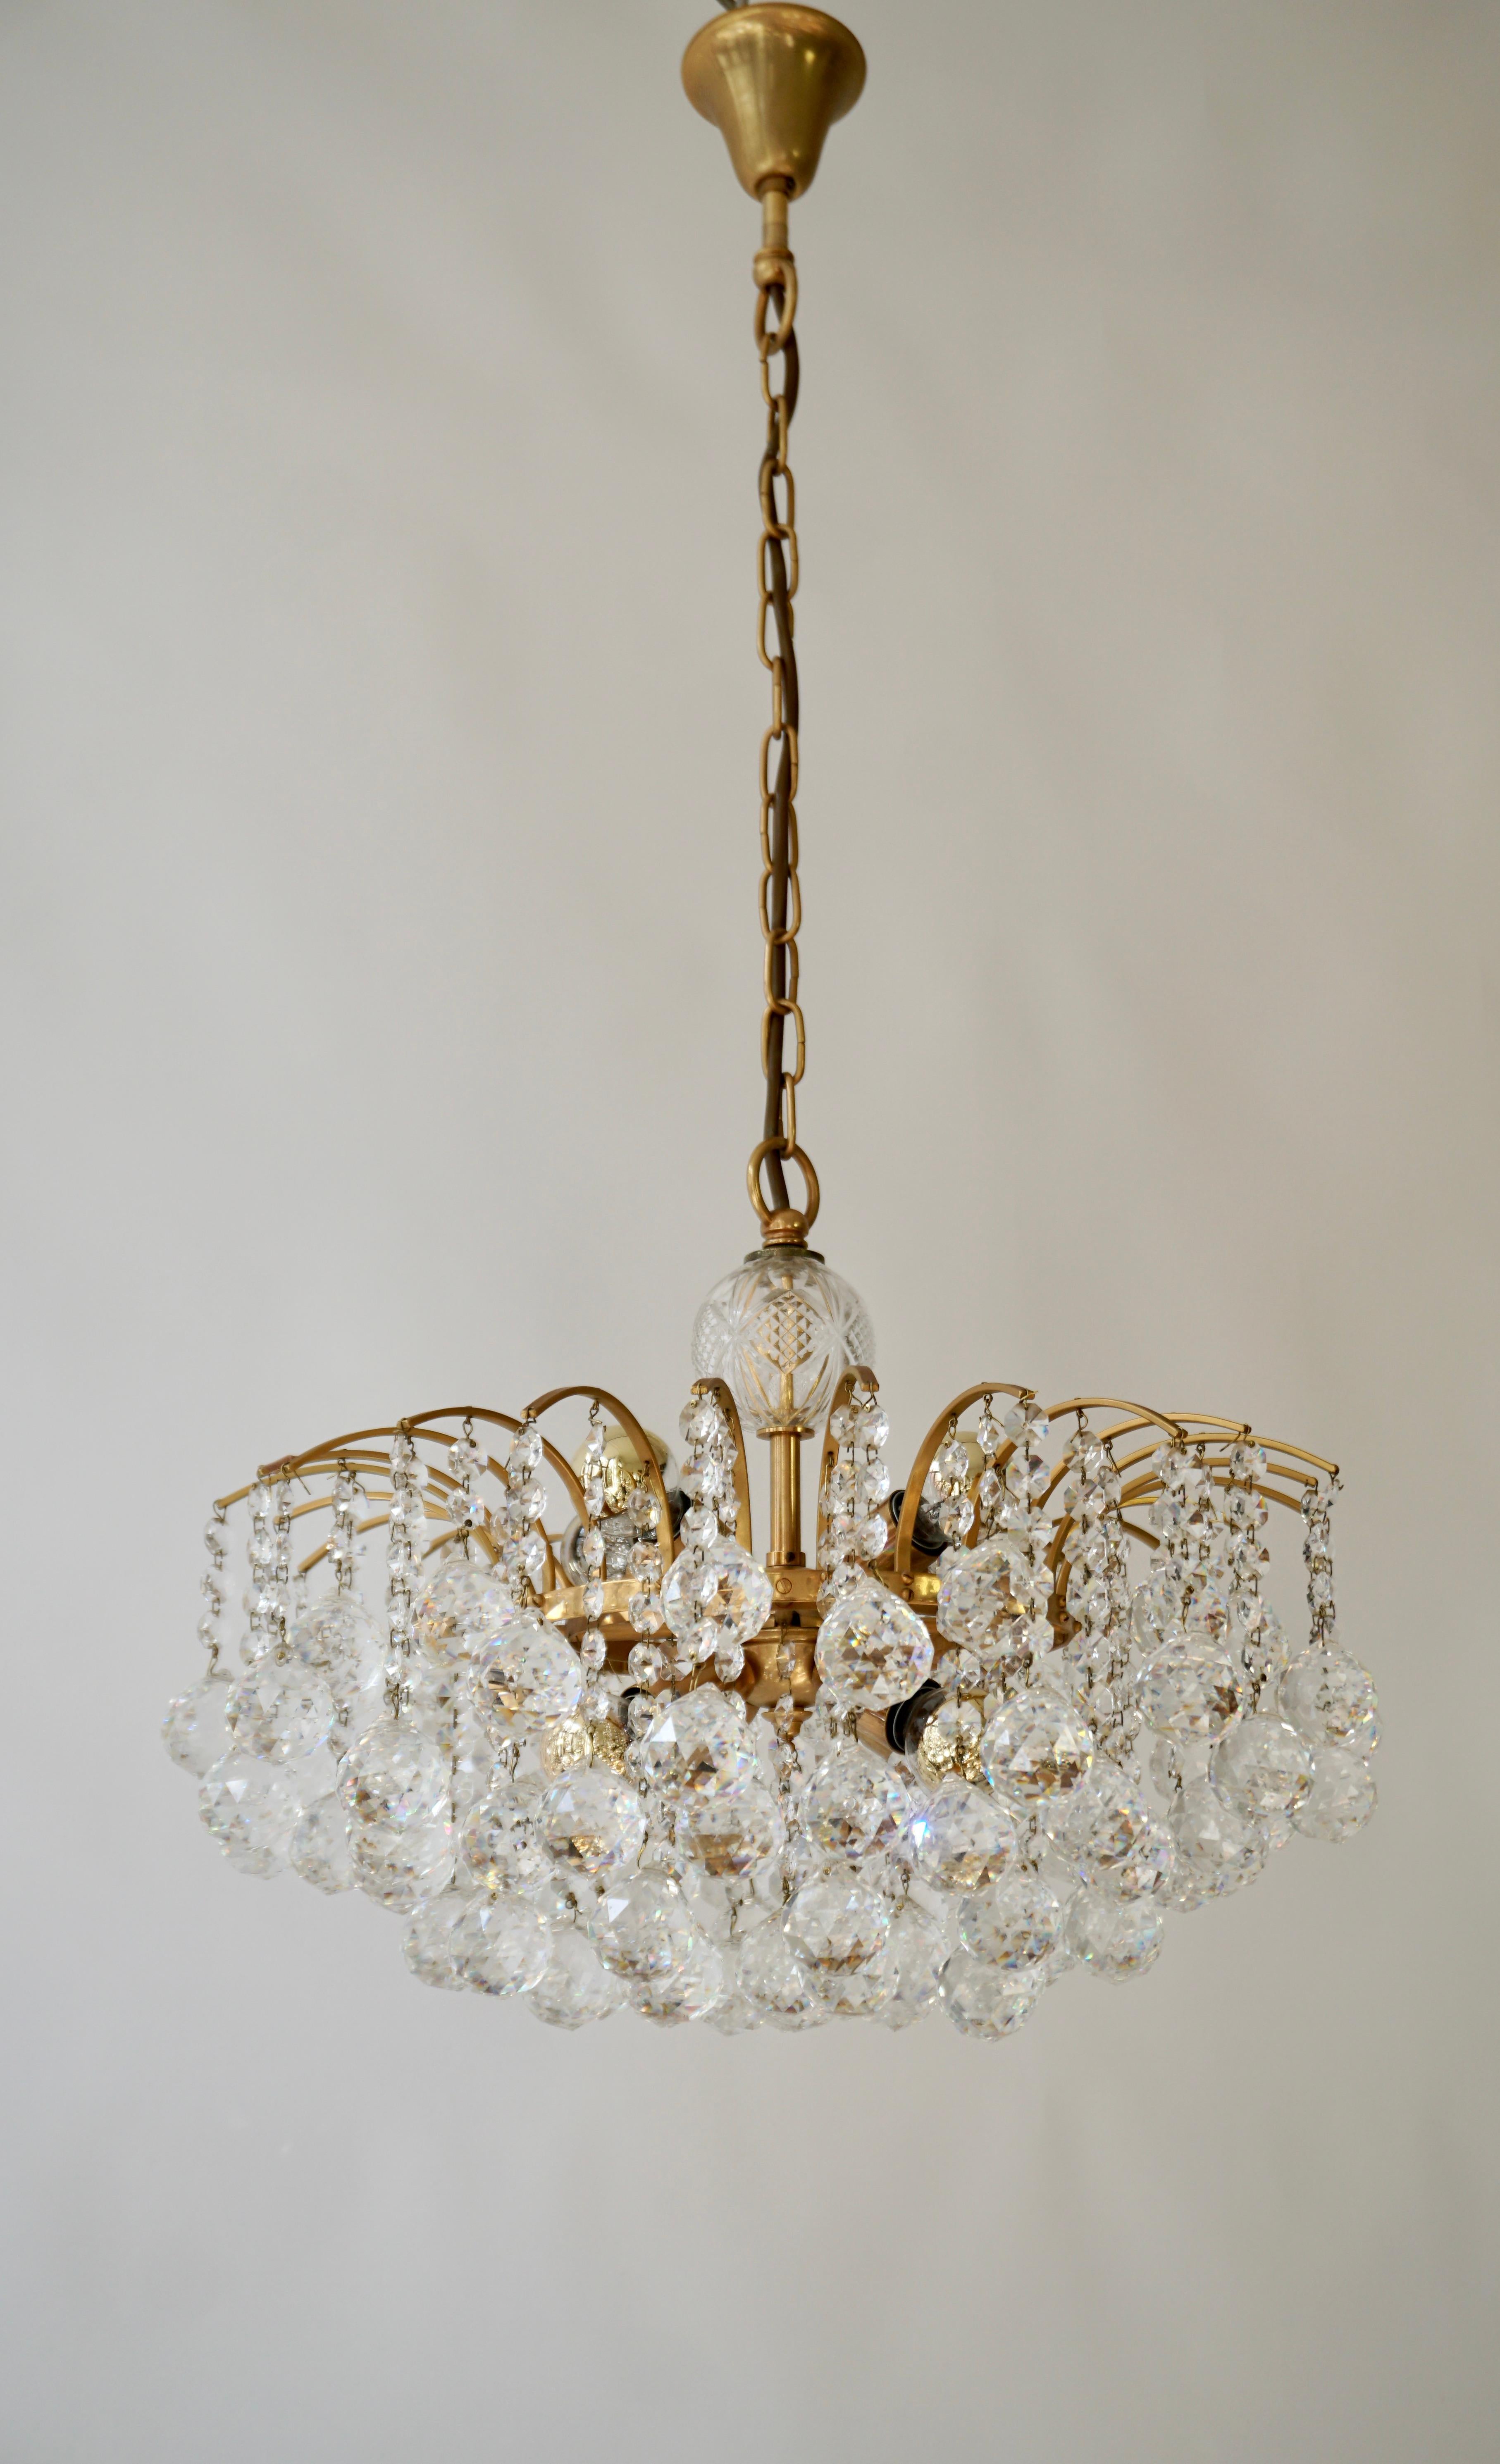 Precious gilt brass and crystal glass Sputnik chandelier made by Christoph Palme or Palwa, Germany, circa 1960-1970. 

The chain-hanging chandelier has a gilt brass Sputnik construction with lots of high lead hand-cut faceted octagonal crystal